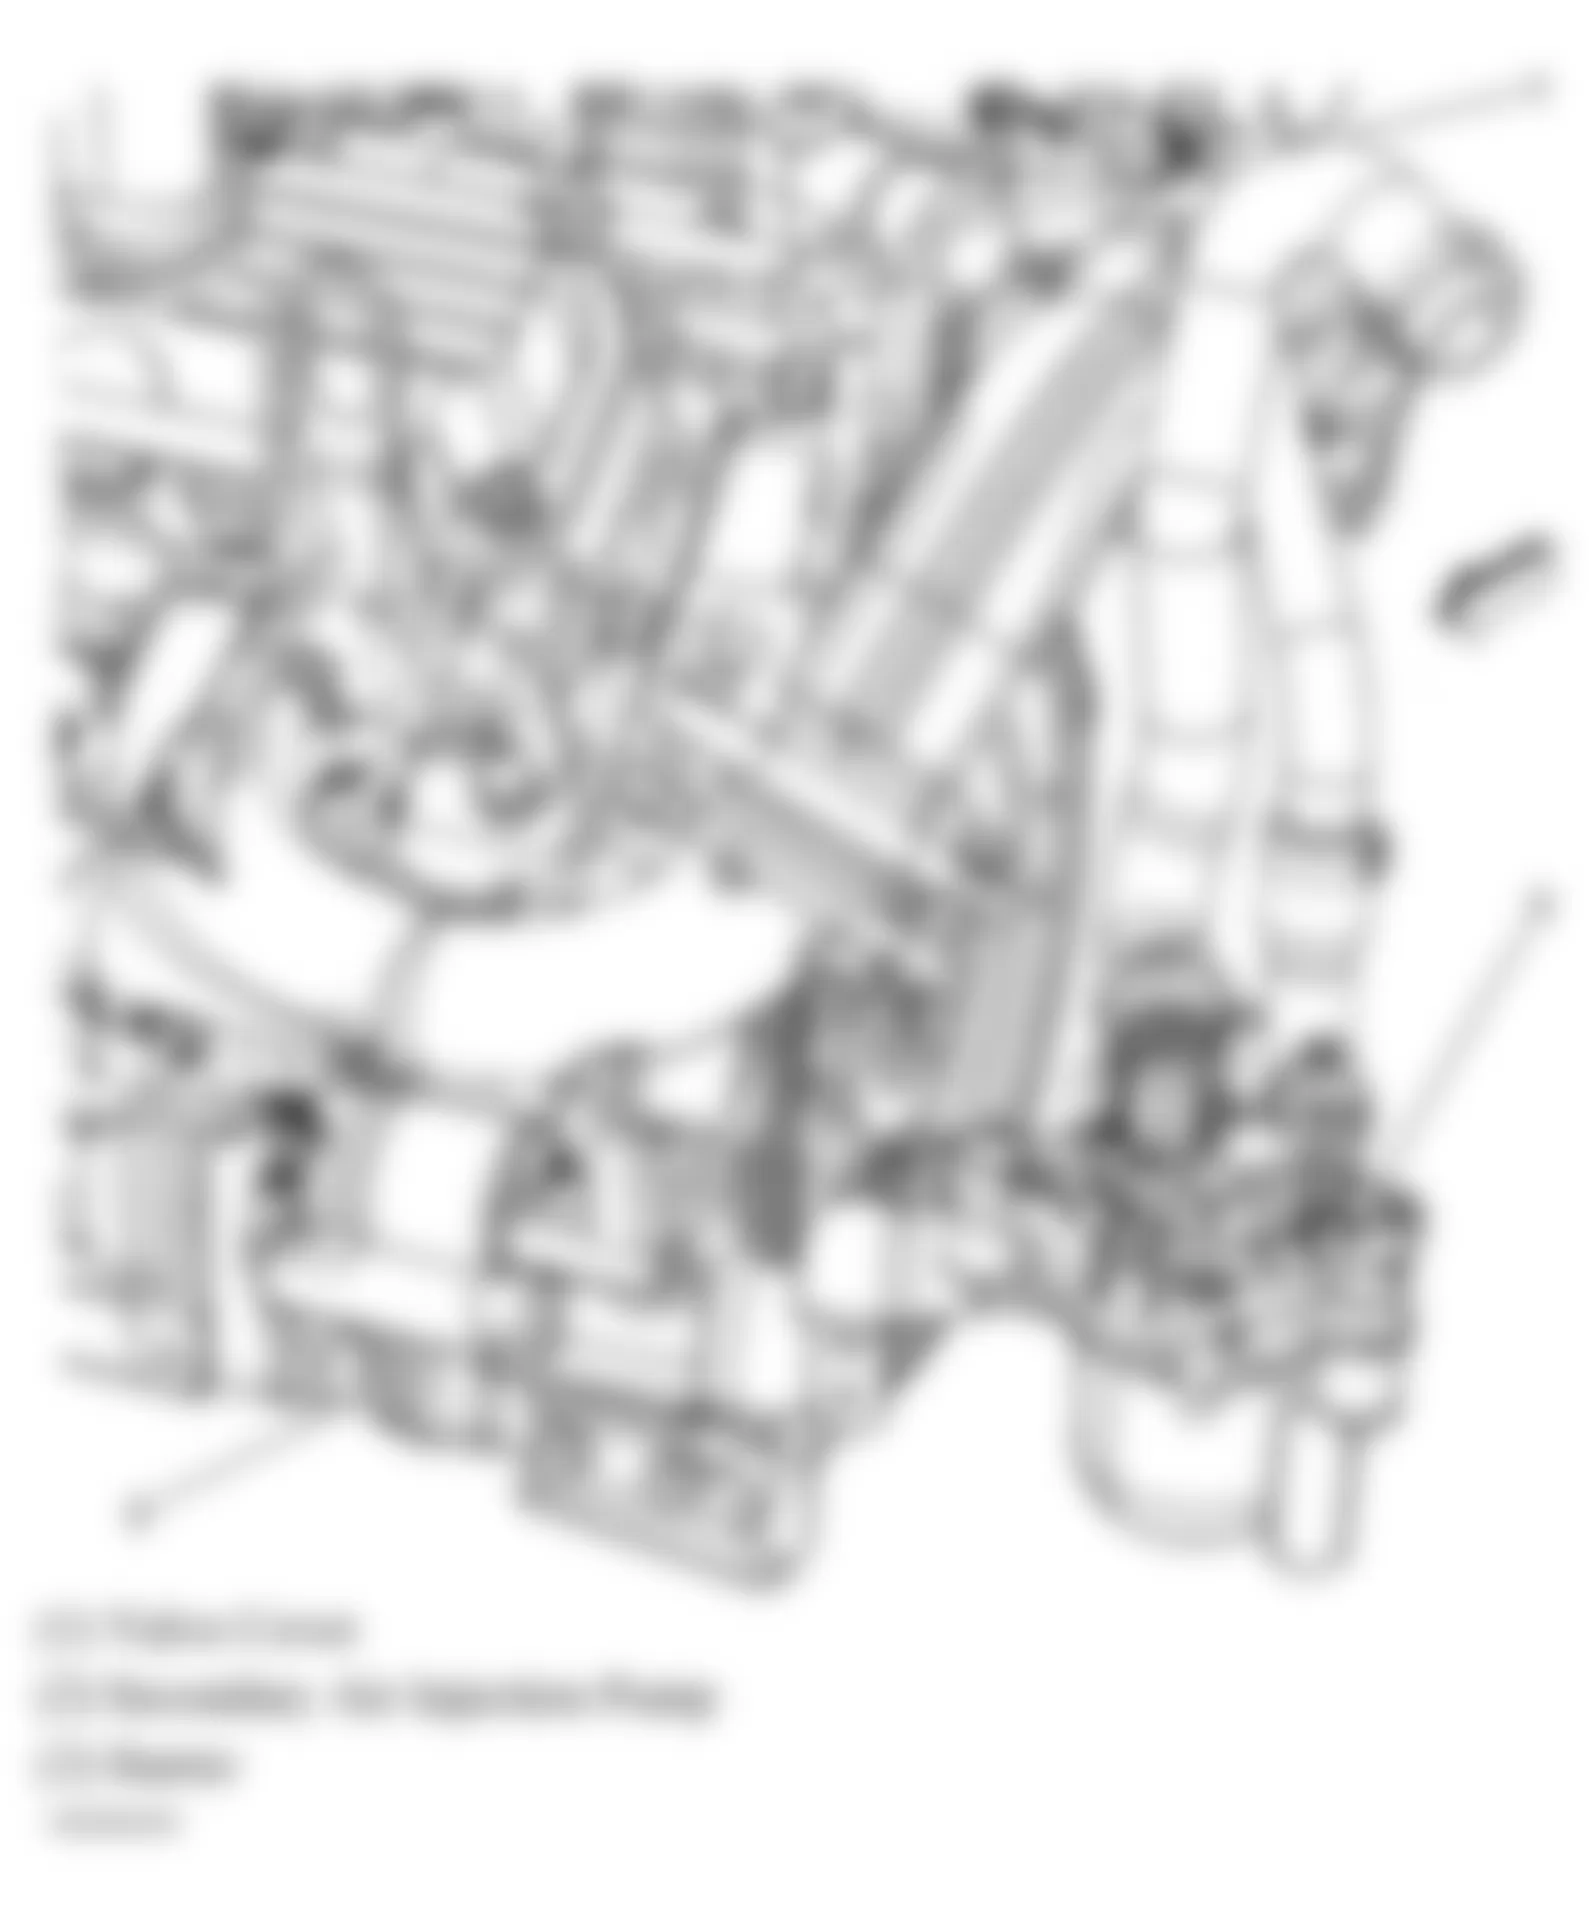 Buick Allure CXL 2006 - Component Locations -  Left Rear Of Engine (3.8L)